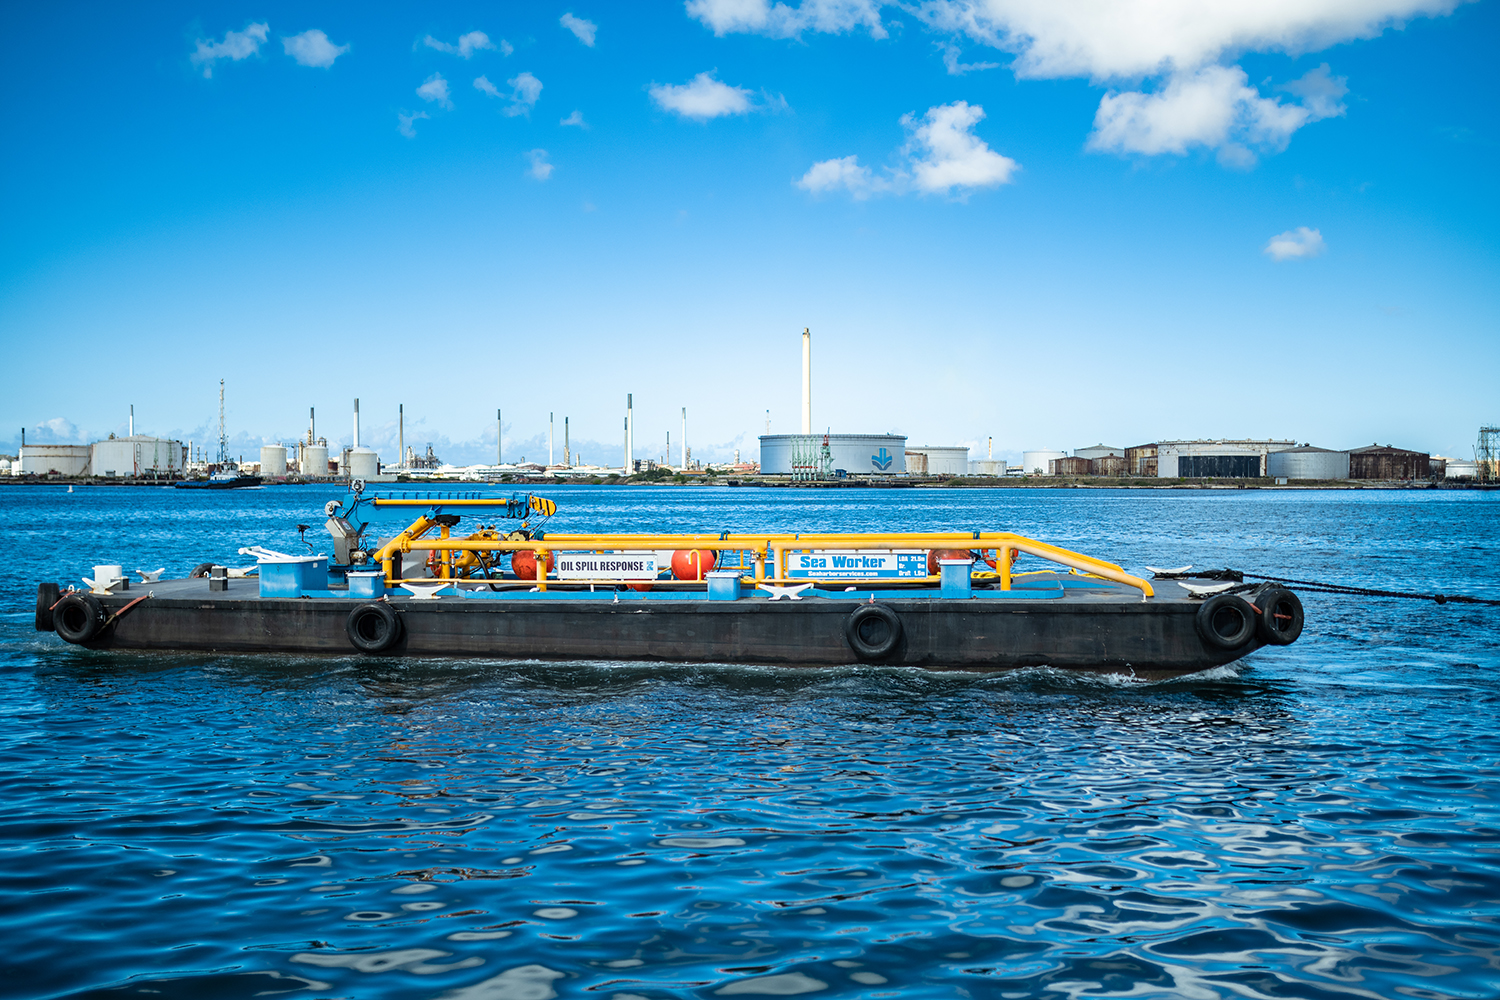 Discovering Maritime Barge Services in Curacao: Seaharbor Leading the Way